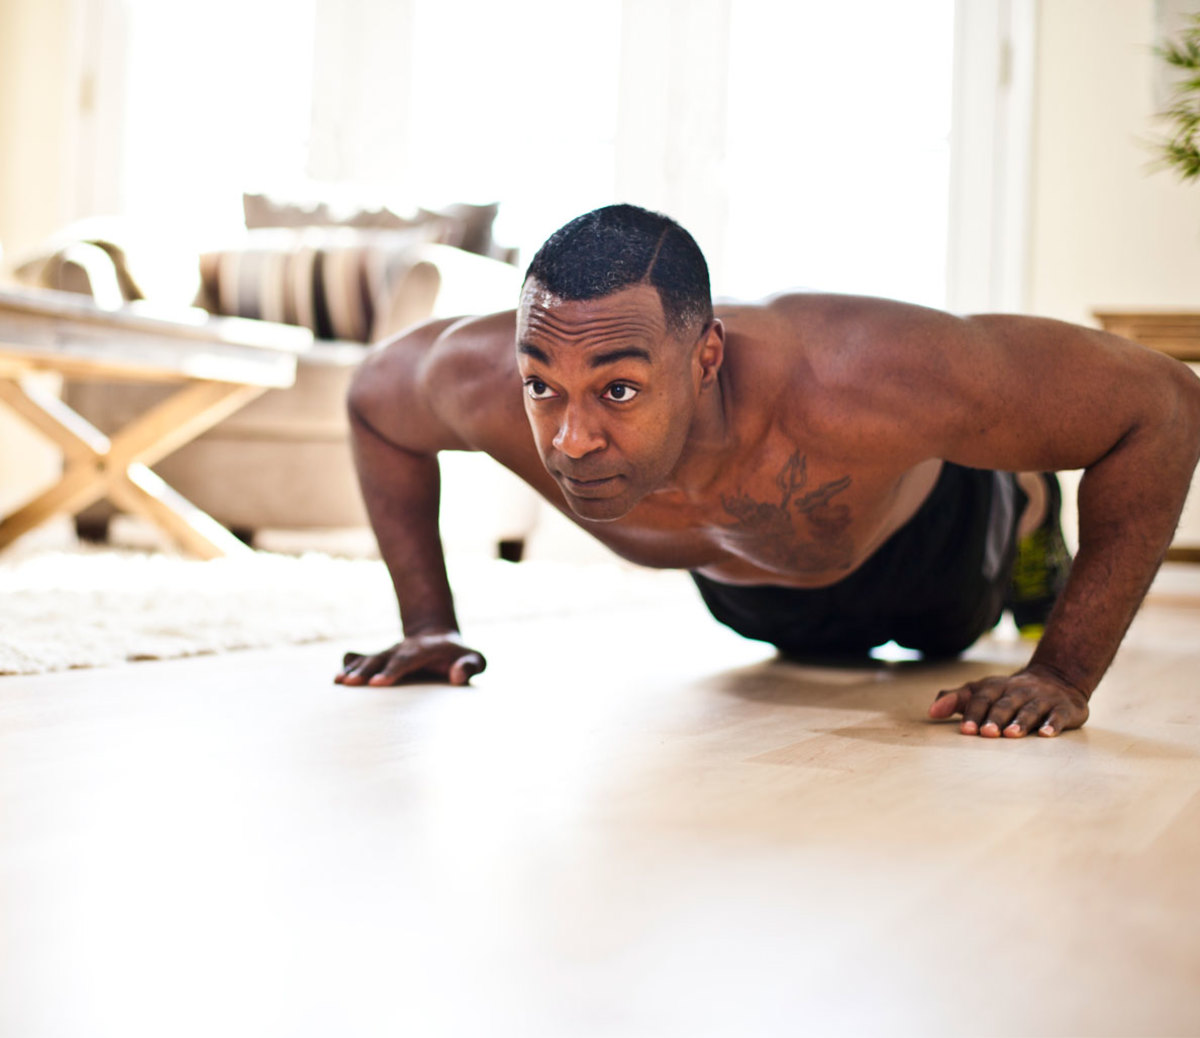 10 At-Home Workouts to Lose Weight and Build Muscle - Men's Journal